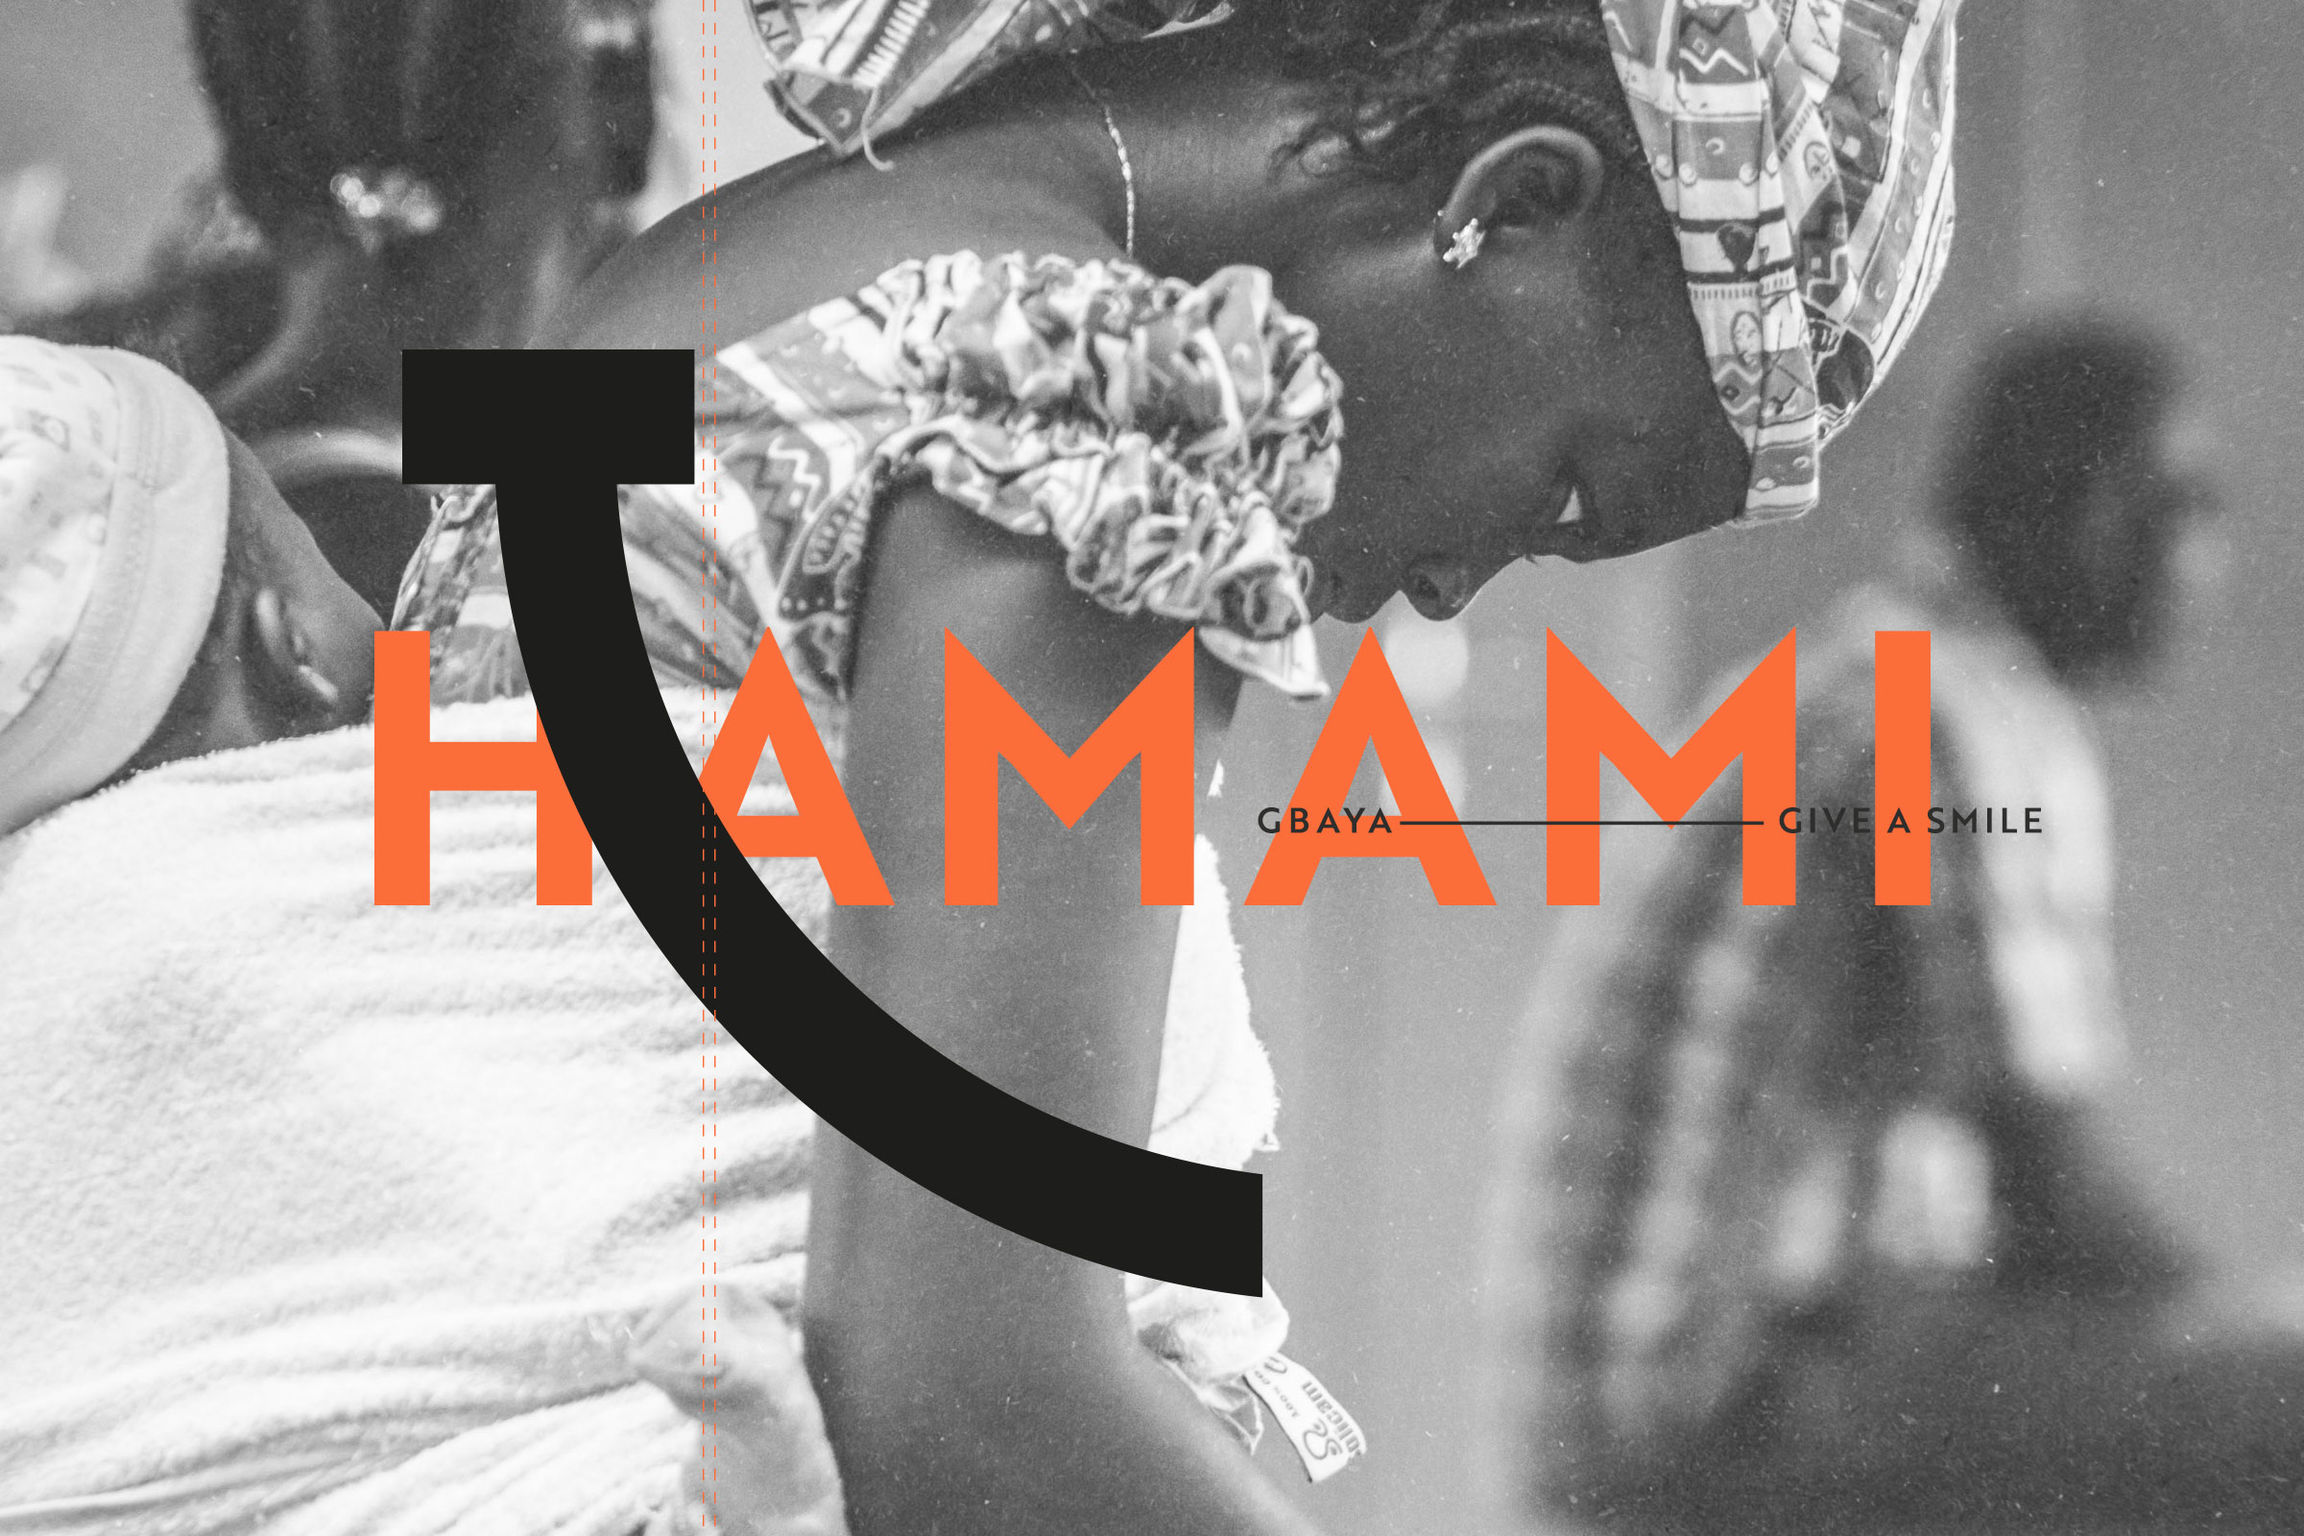 HAMAMI – Give A Smile